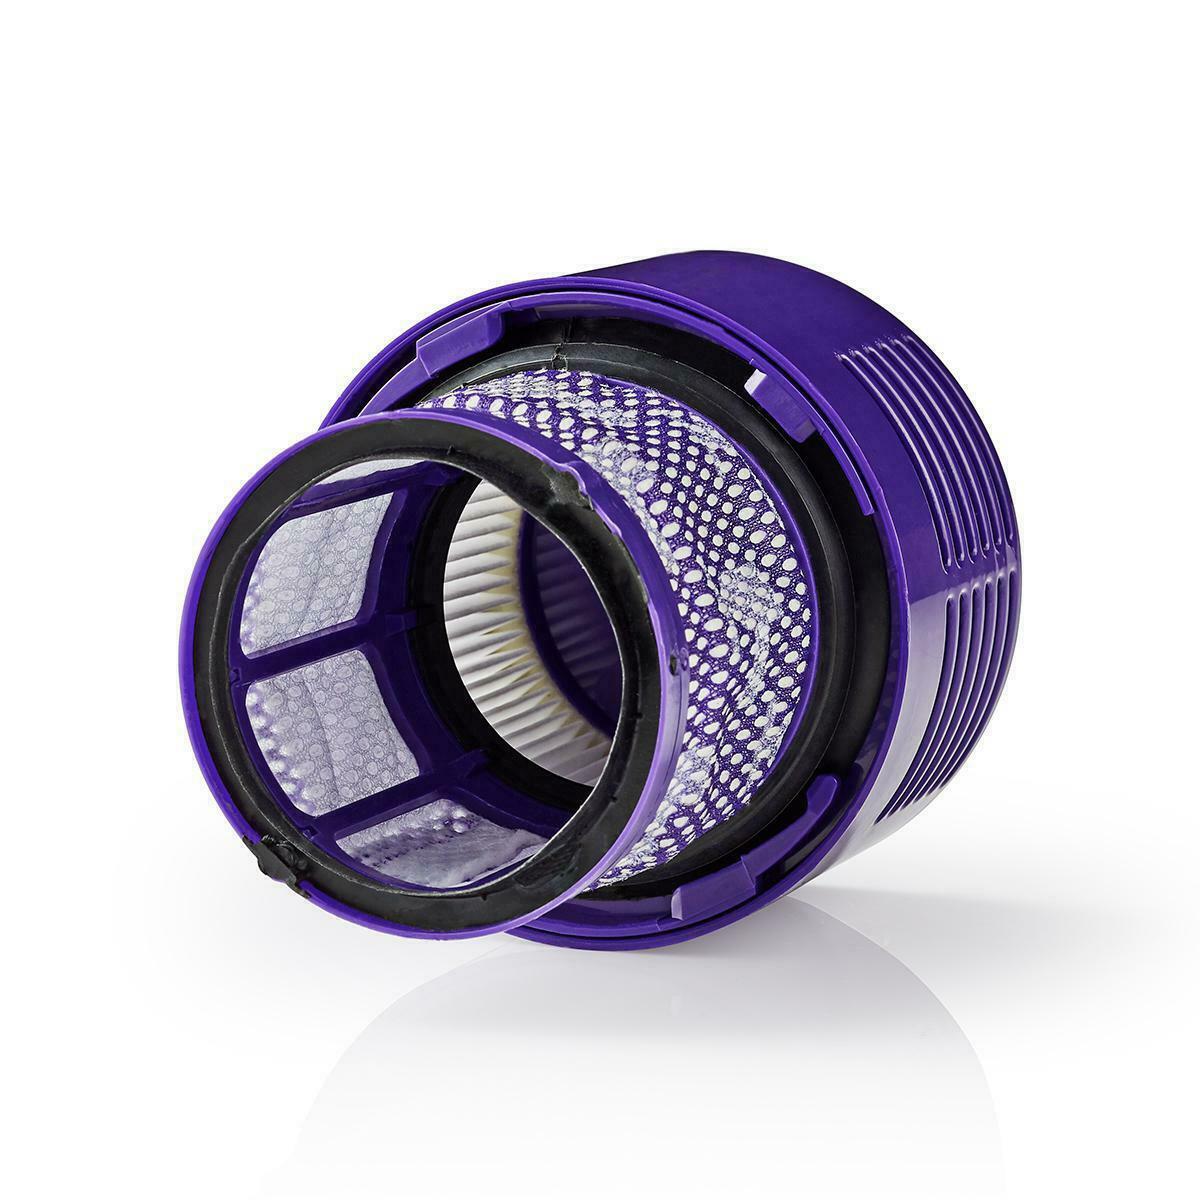 Dyson V10 Animal - How to Clean Filter 